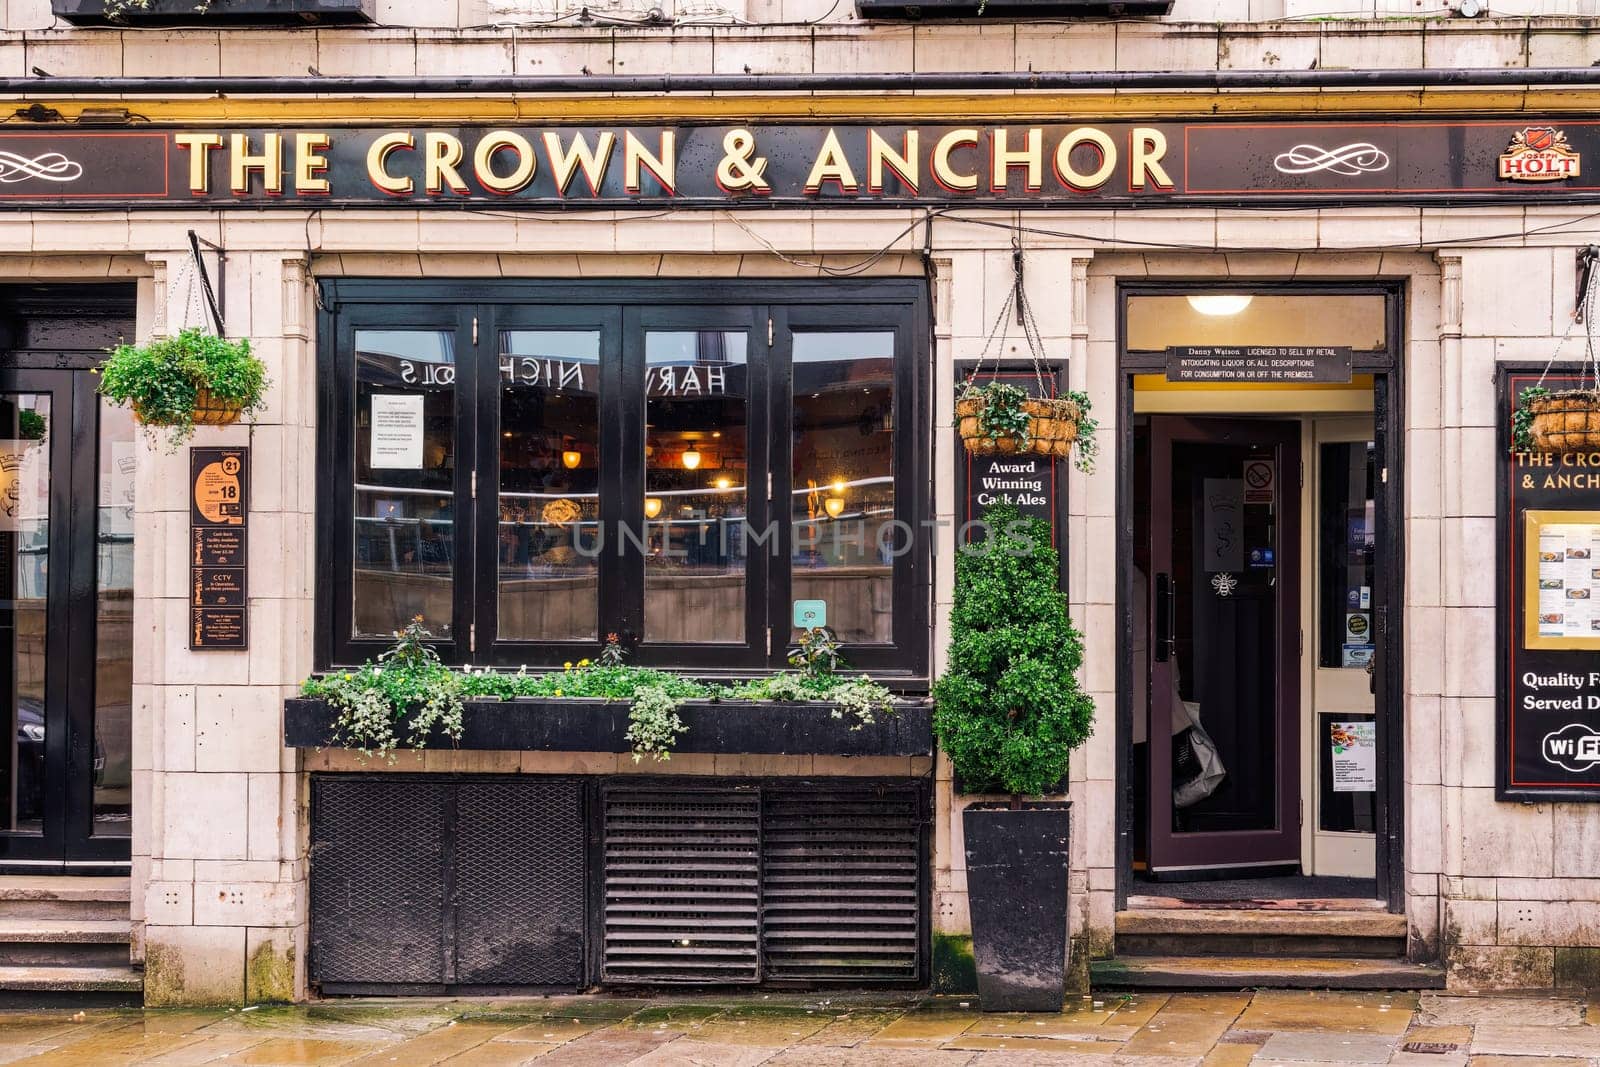 Manchester, UK - February 20 2020: The Crown and Anchor pub facade with house-brand ales and comfort food, operated by the Joseph Holt Brewery.